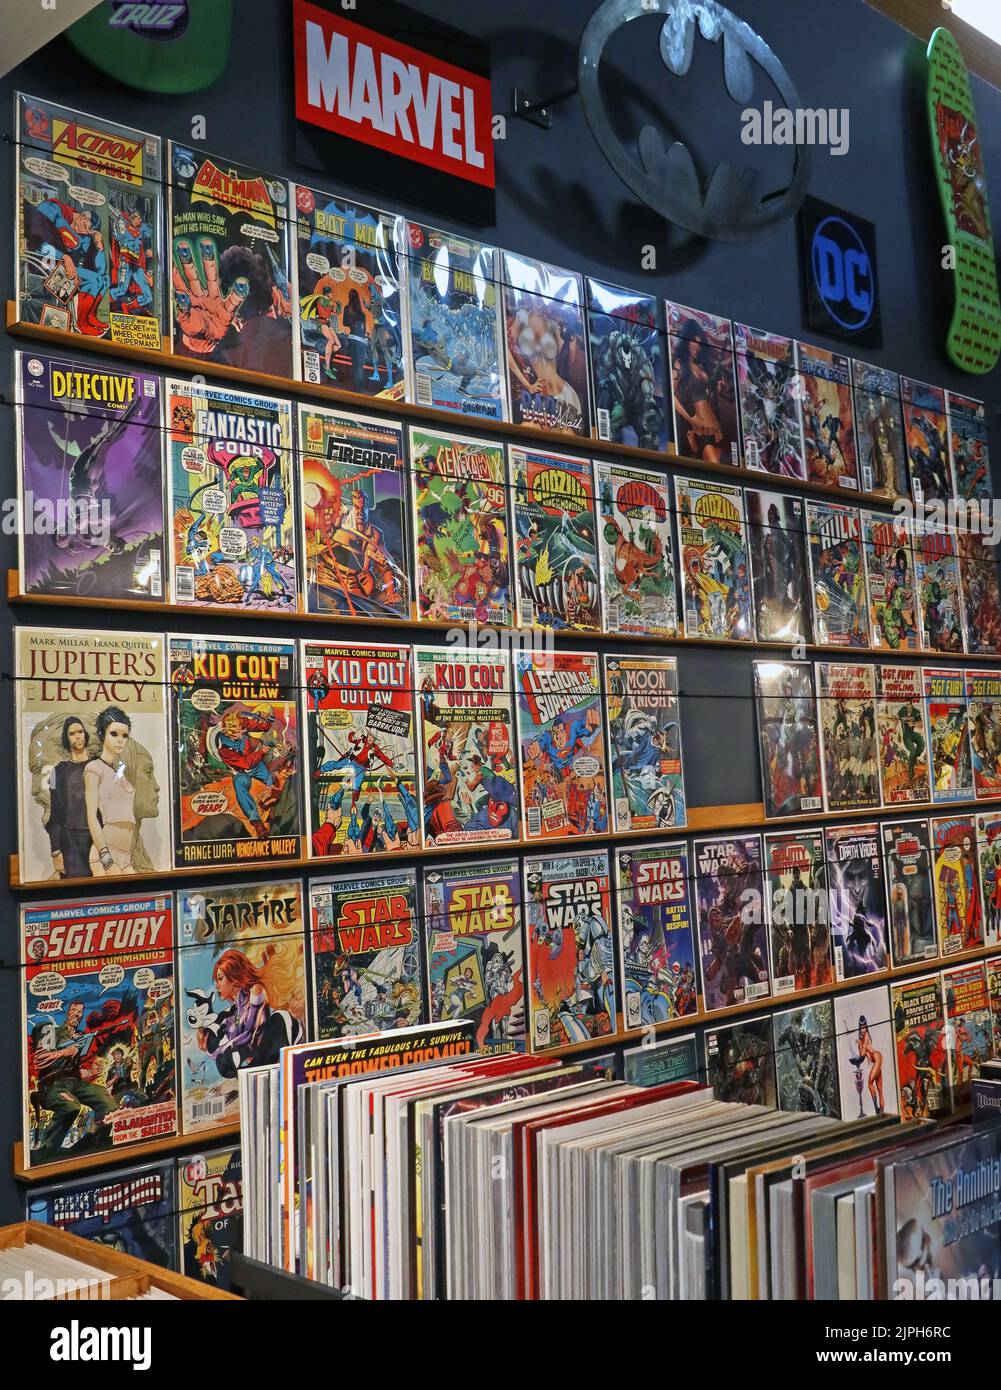 QS, Marvel et autres comics stall, à Hereford Butter Market, High Town, Hereford, Herefordshire, Angleterre, ROYAUME-UNI, HR1 2AA Banque D'Images